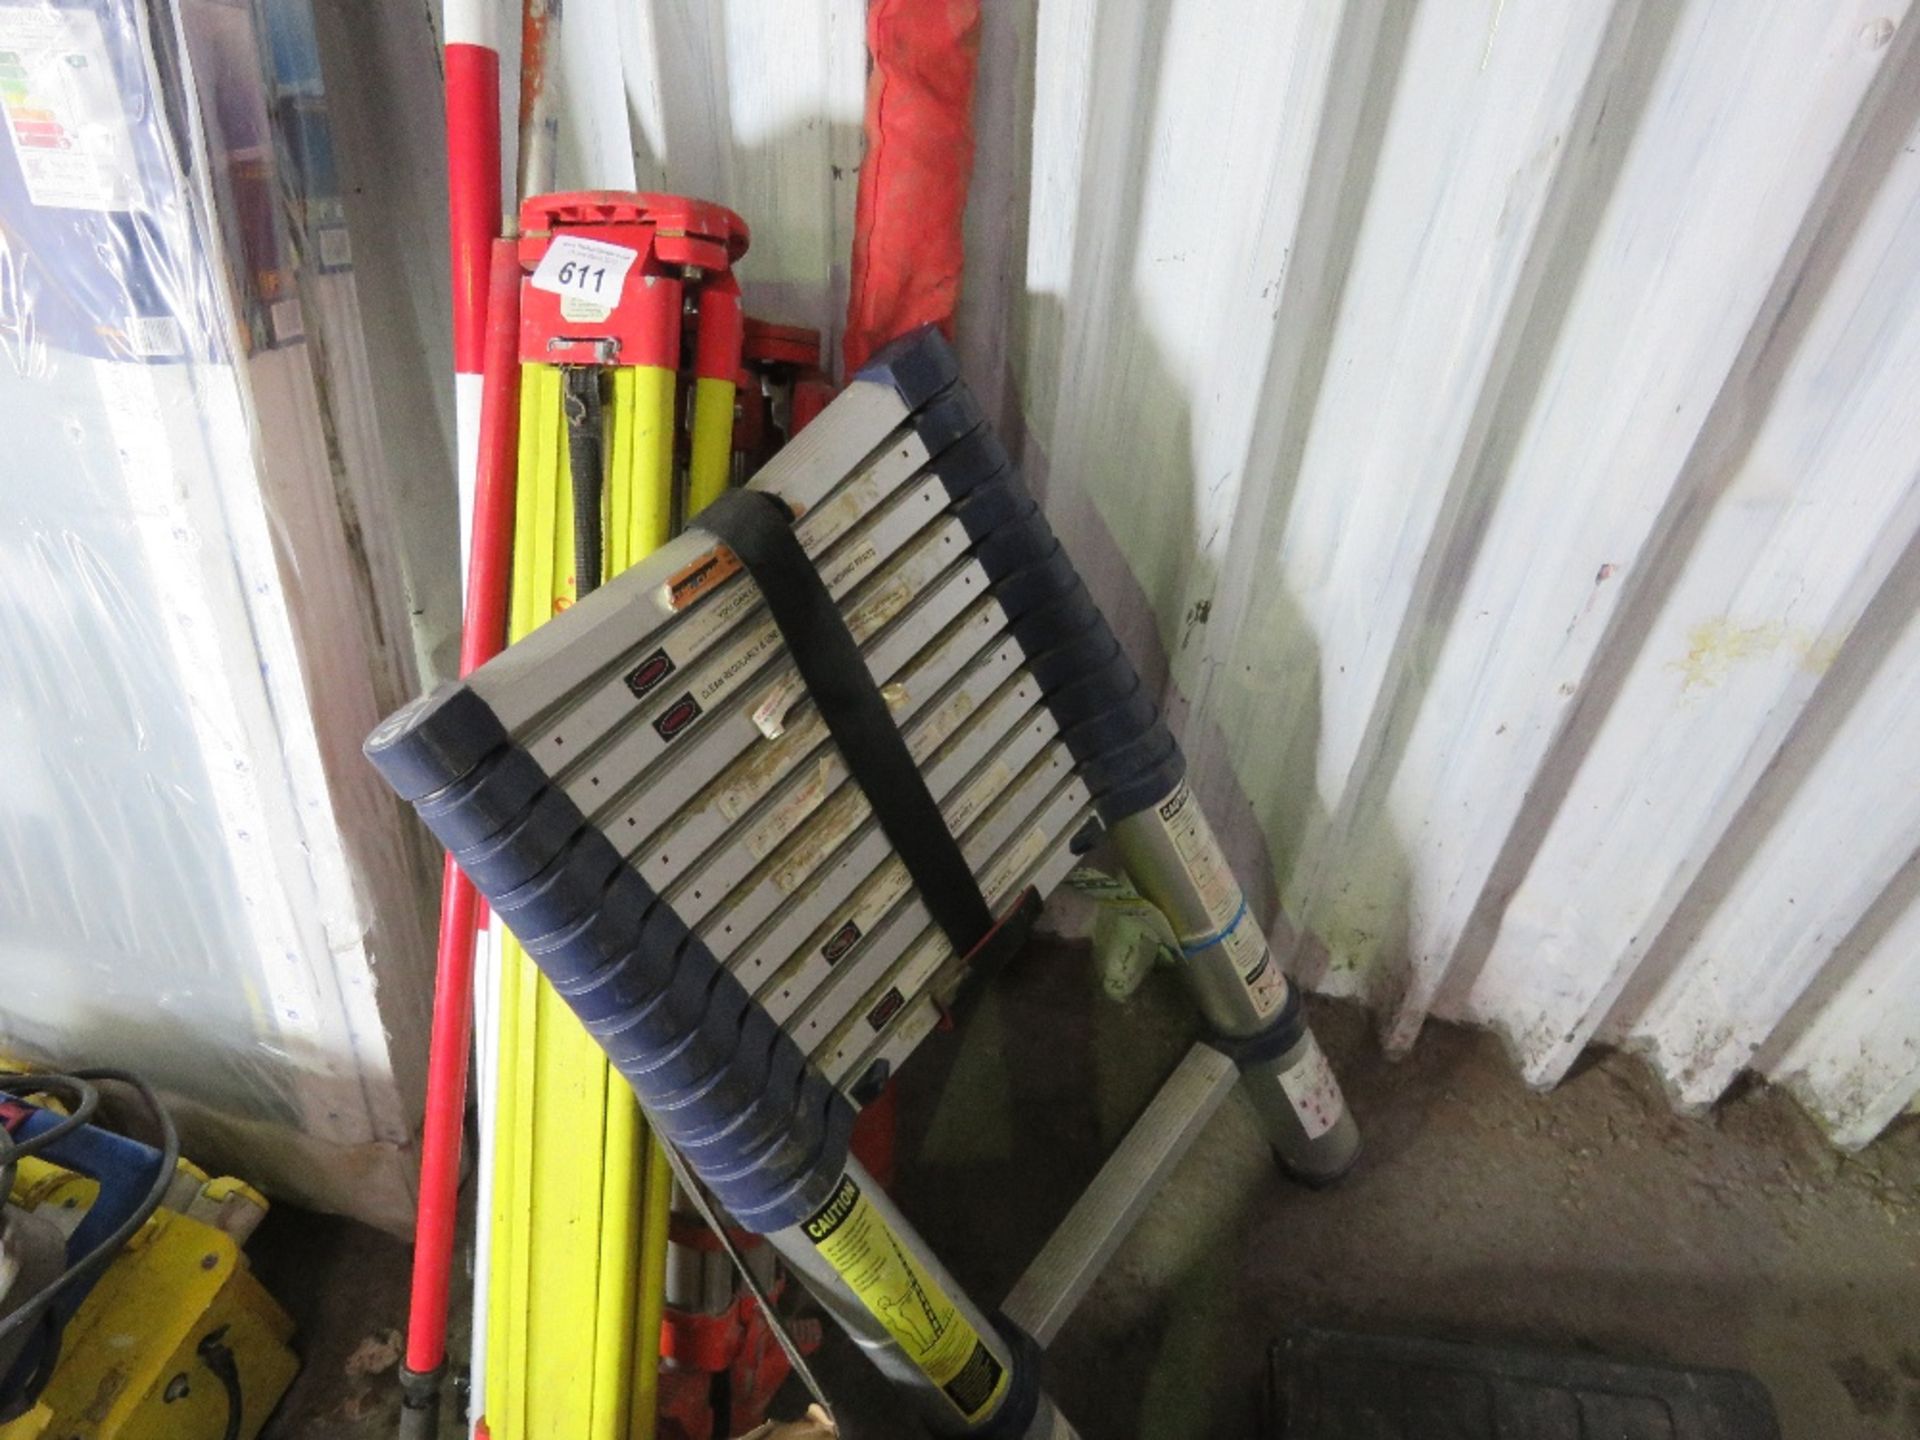 2 X SURVEY TRIPODS, POLES AND A MEASURING STAFF PLUS A TELESCOPIC LADDER (NEEDS ATTENTION)